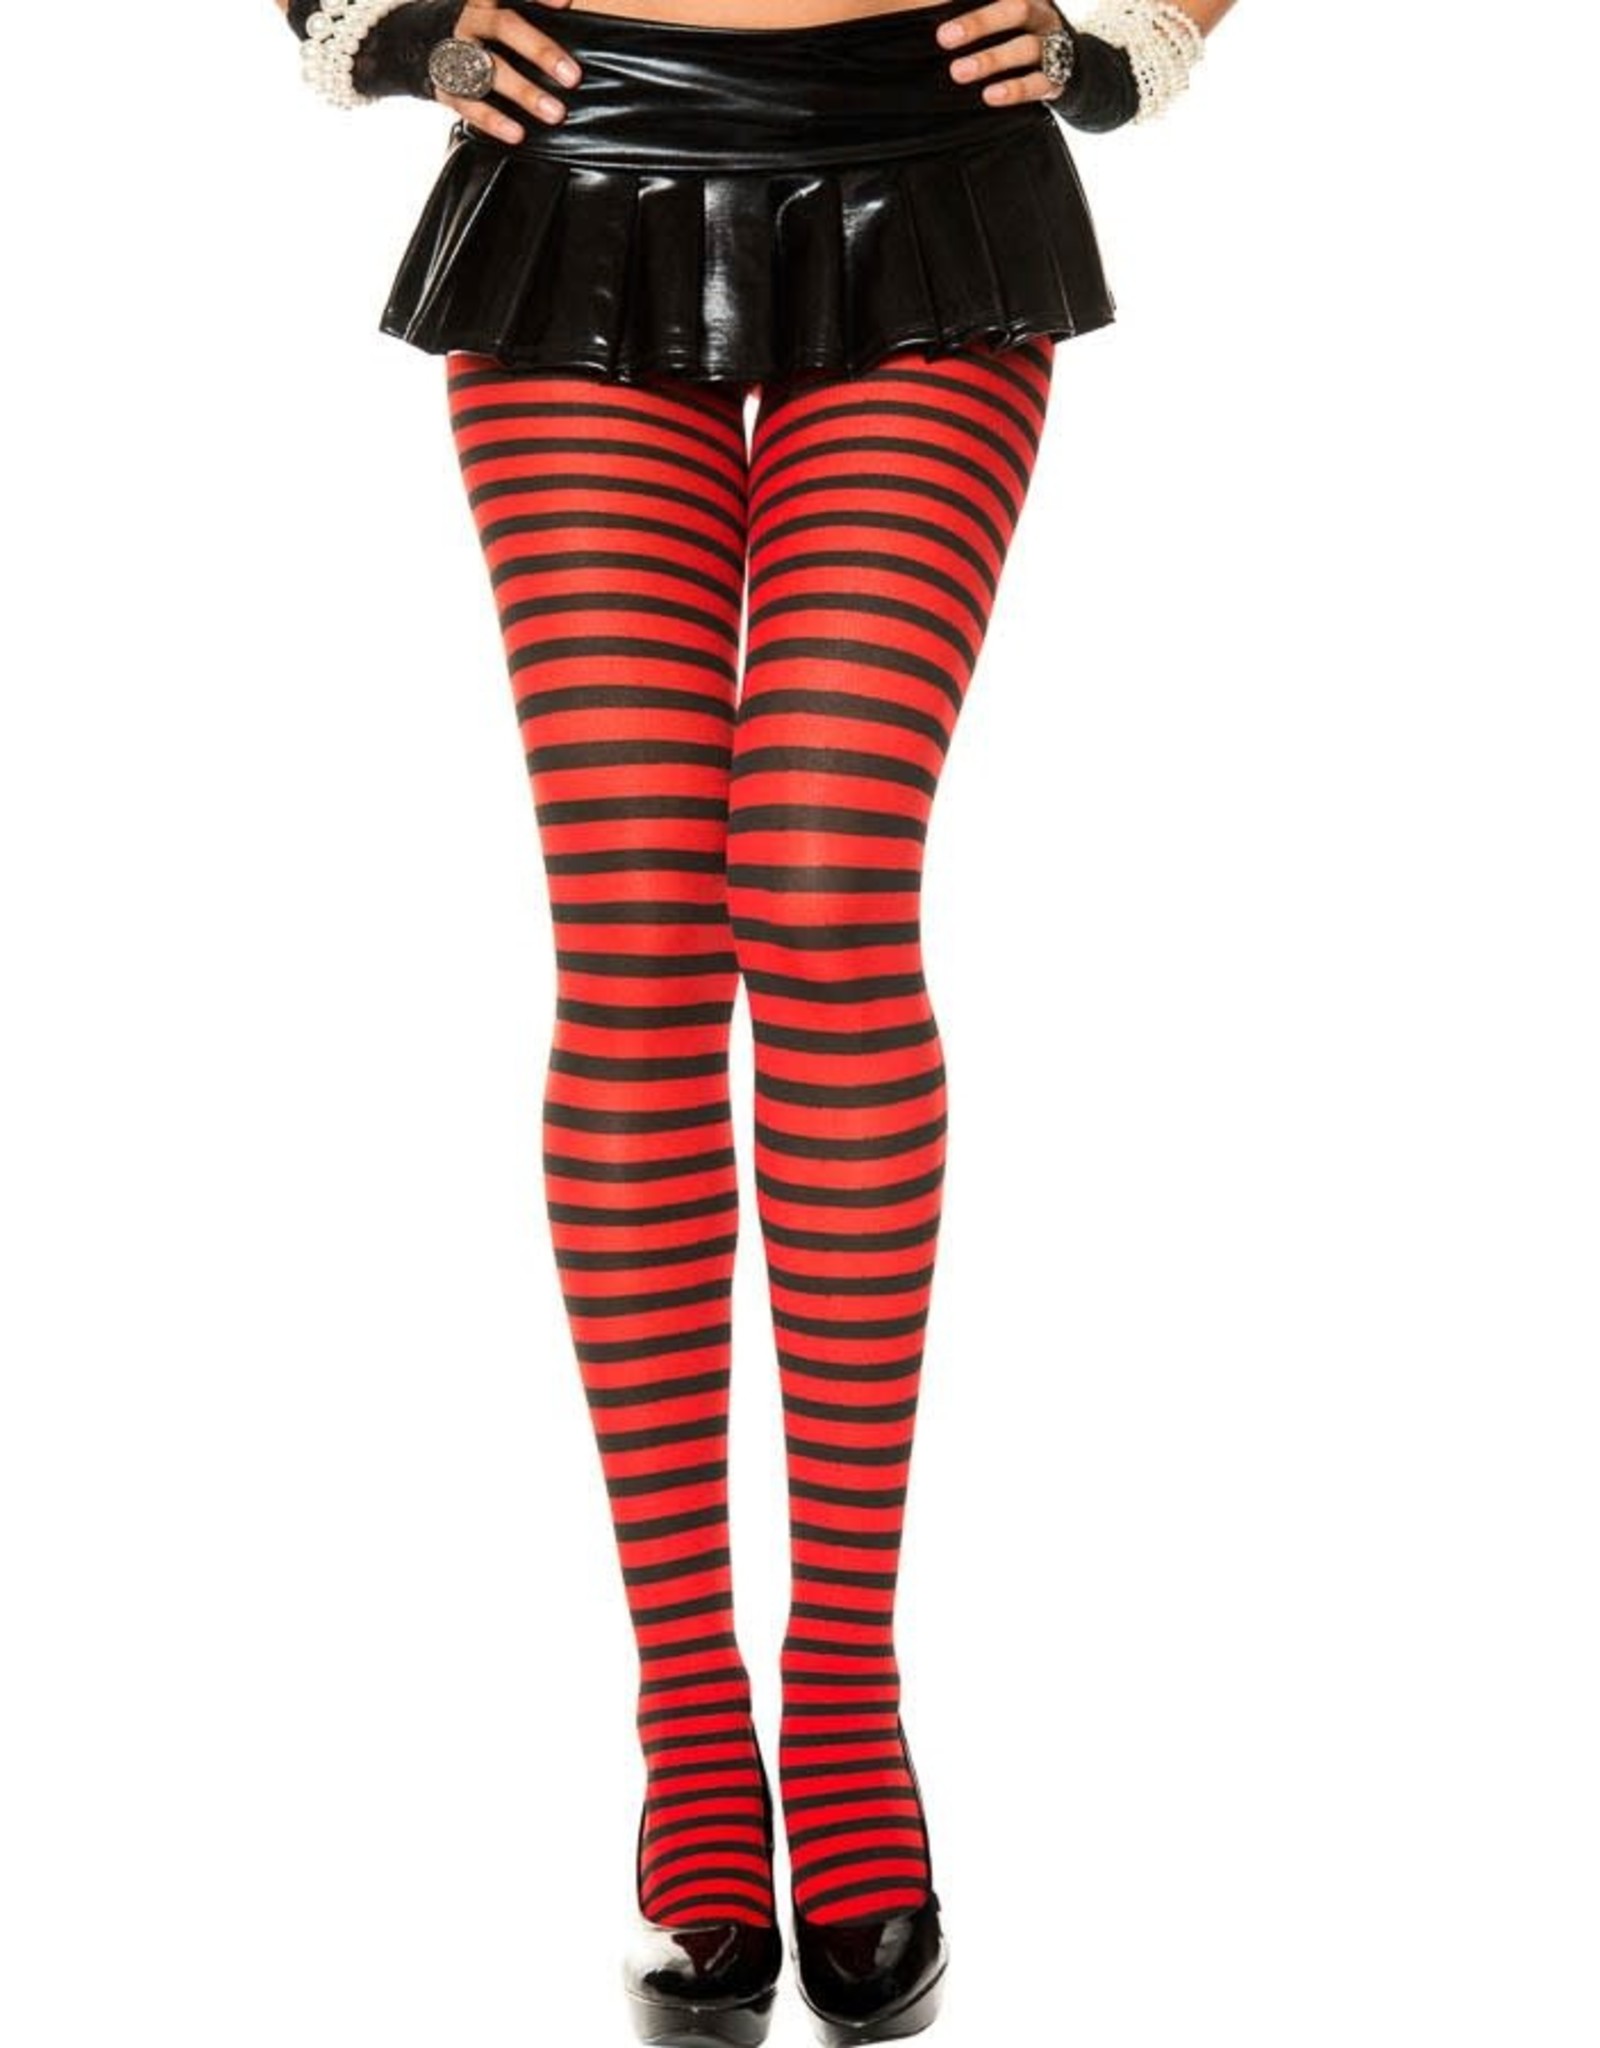 MUSIC LEGS - Black/Red Plus Size Striped Tights